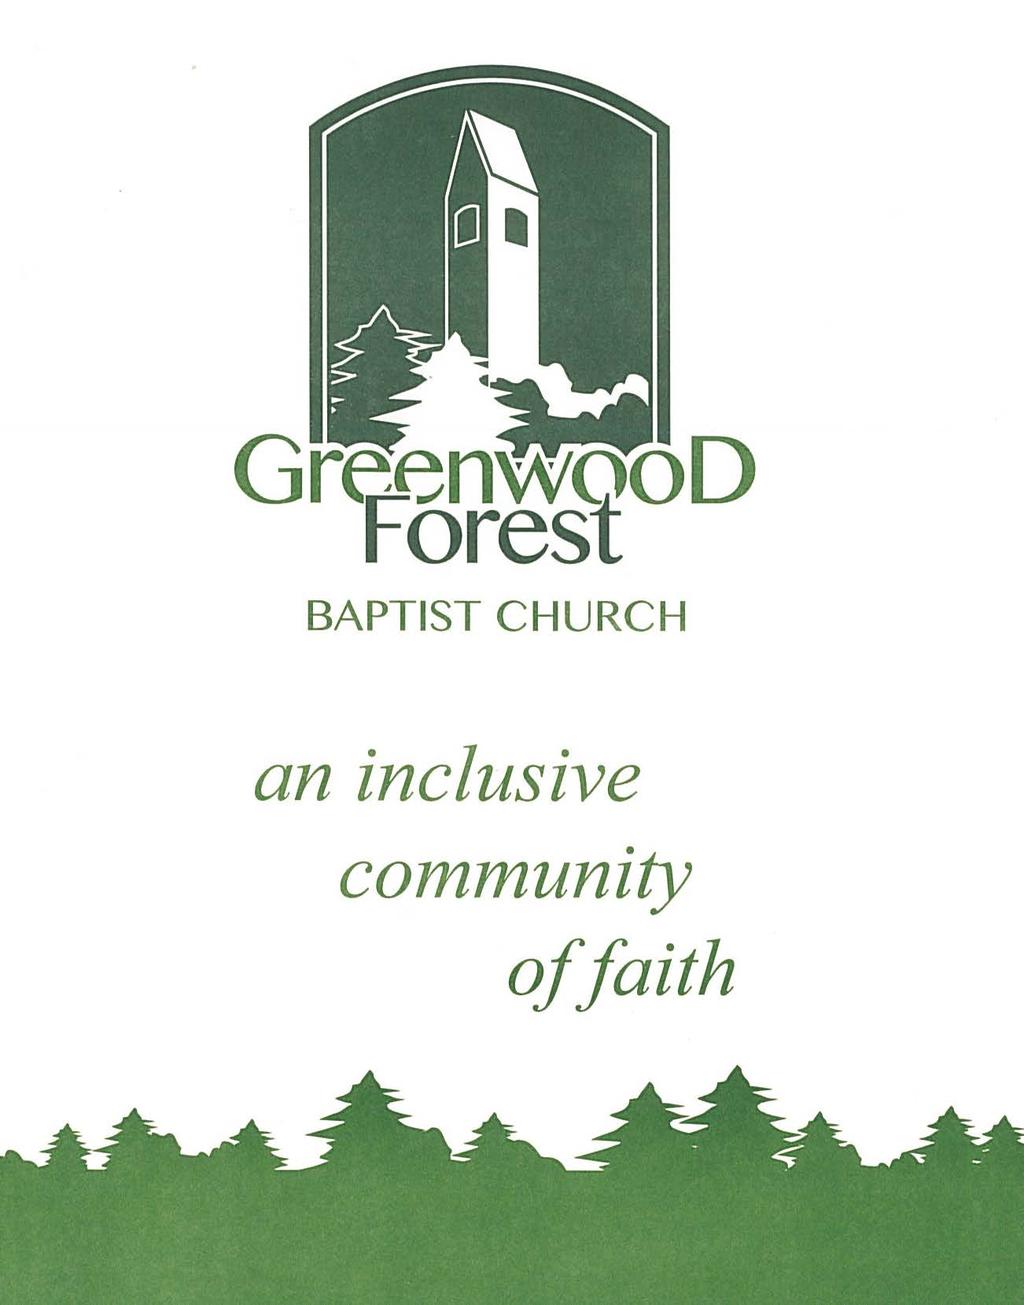 GREENWOOD FOREST BAPTIST CHURCH Palm Sunday March 25, 2018 There will be no Children s Time programming this Sunday. All children are invited to stay in Worship.